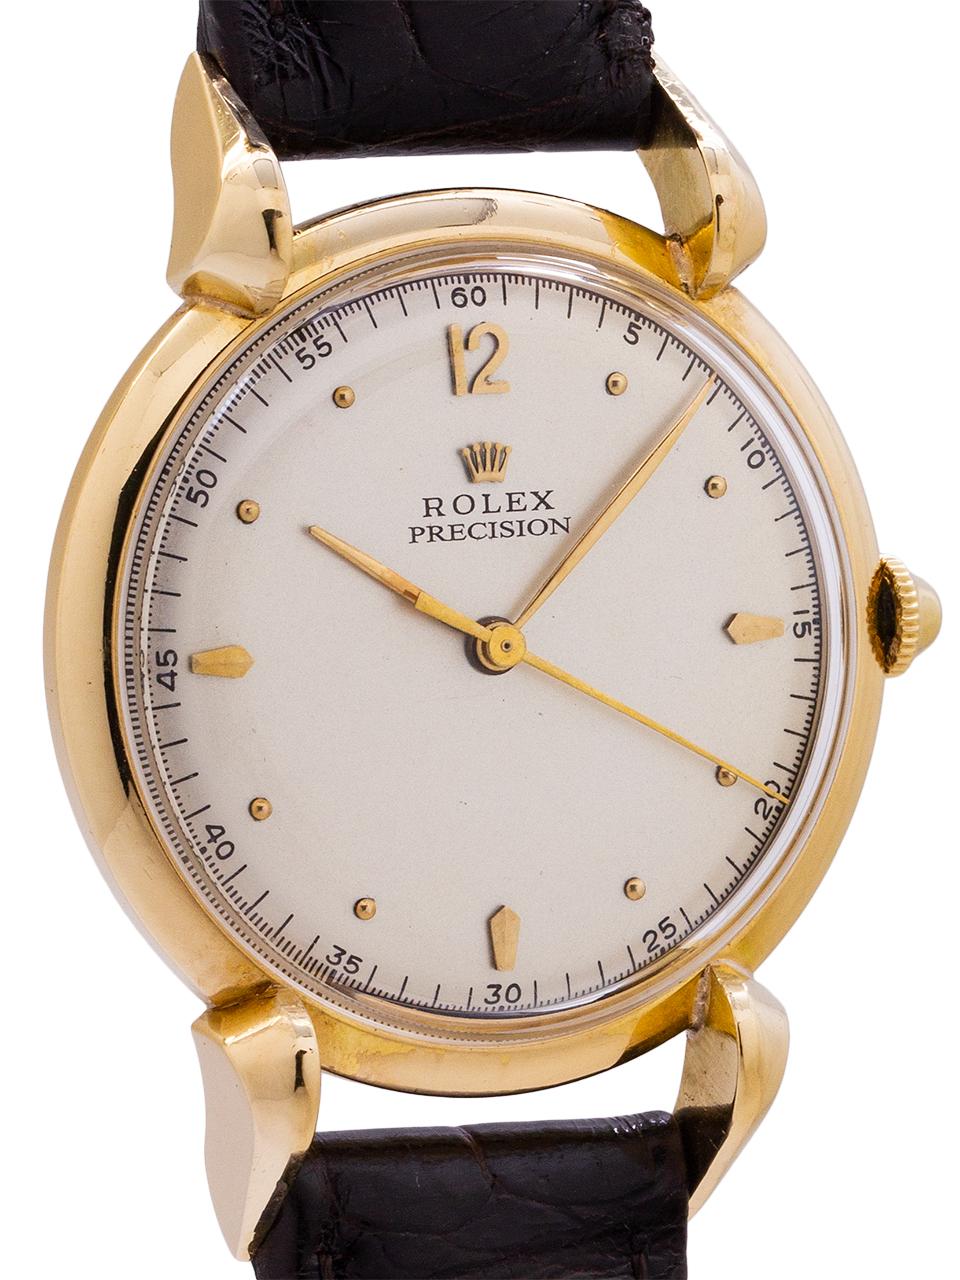 
Rolex 18K yellow gold dress manual wind dress model ref # 4514 circa 1950s. Featuring a 34 x 45mm heavy snap back case with pronounced raised grasshopper lugs. With very pleasing restored matte silver dial with gold applied figures and gilt baton